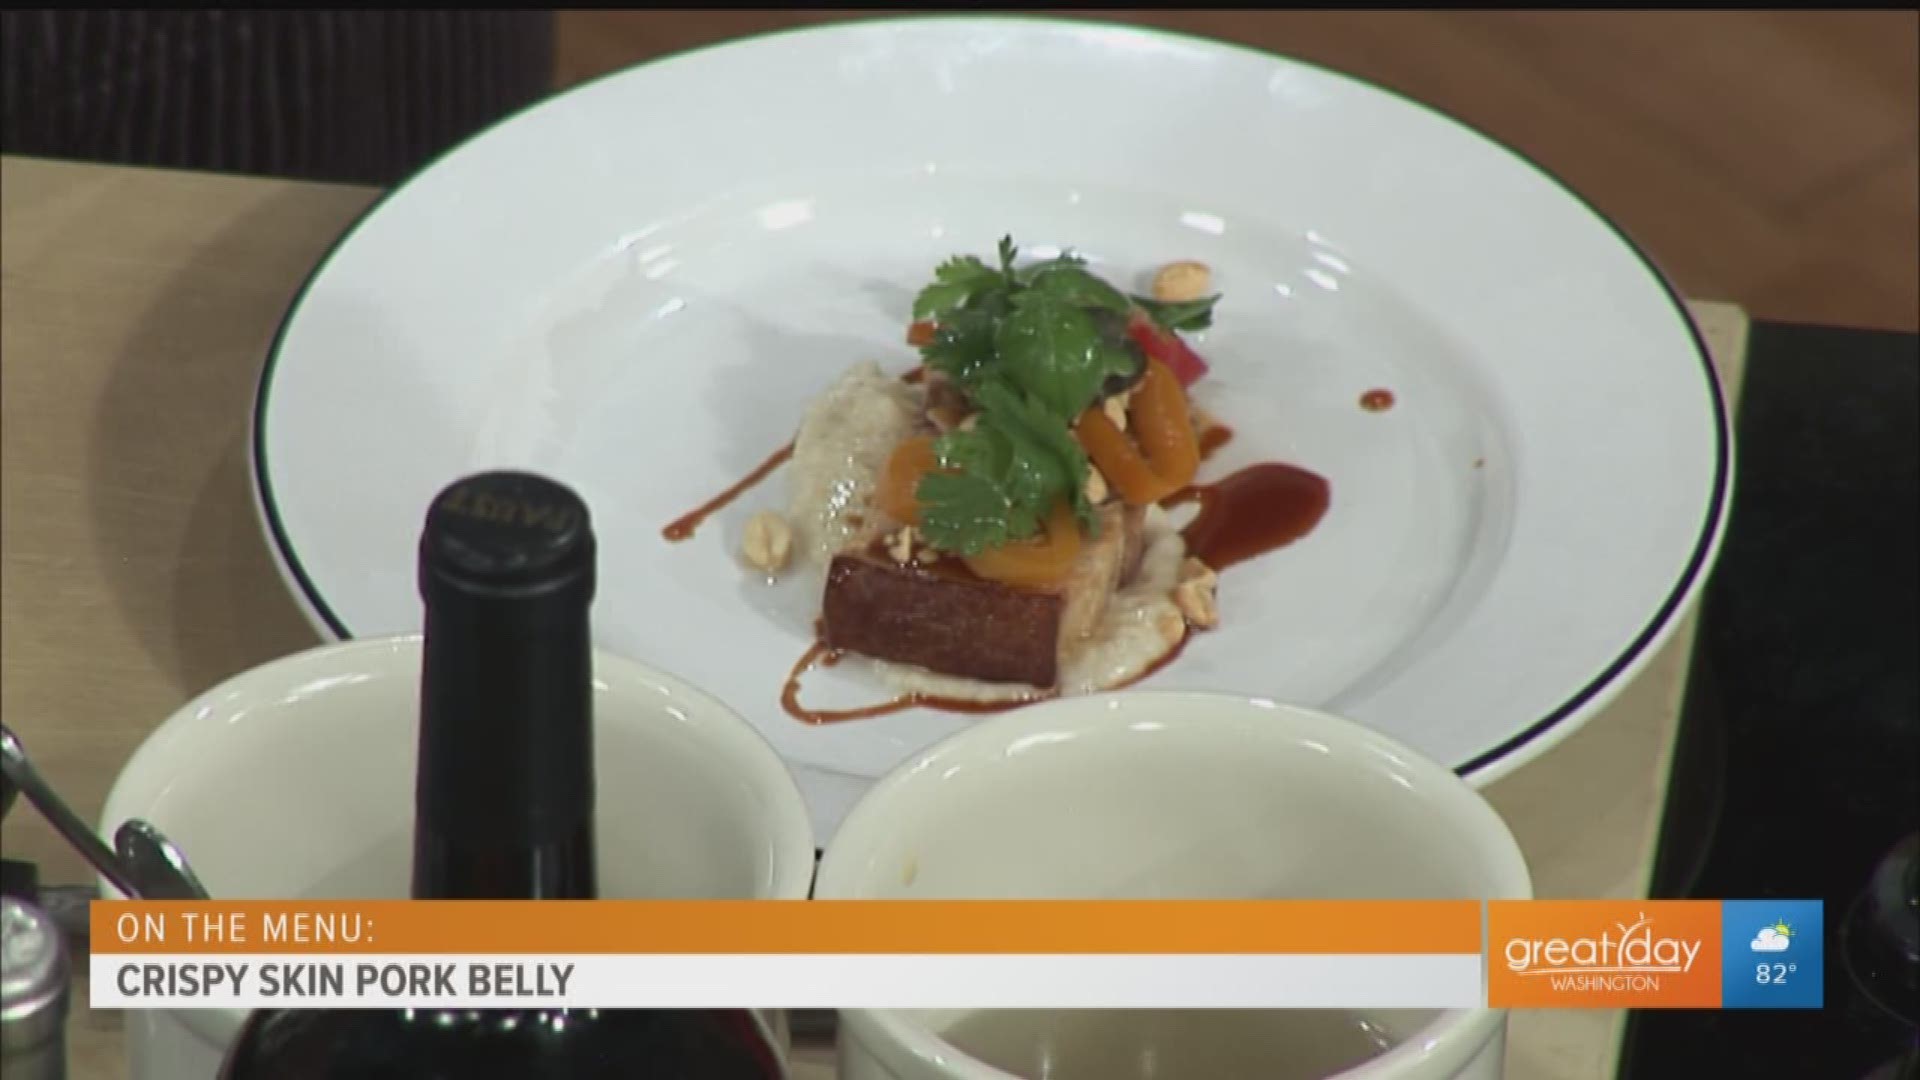 Chef Joseph Conrad of Oak Steakhouse in Alexandria makes crispy skin pork belly paired with Anson Mills white grits. Oak Steakhouse recently opened in Alexandria, VA.